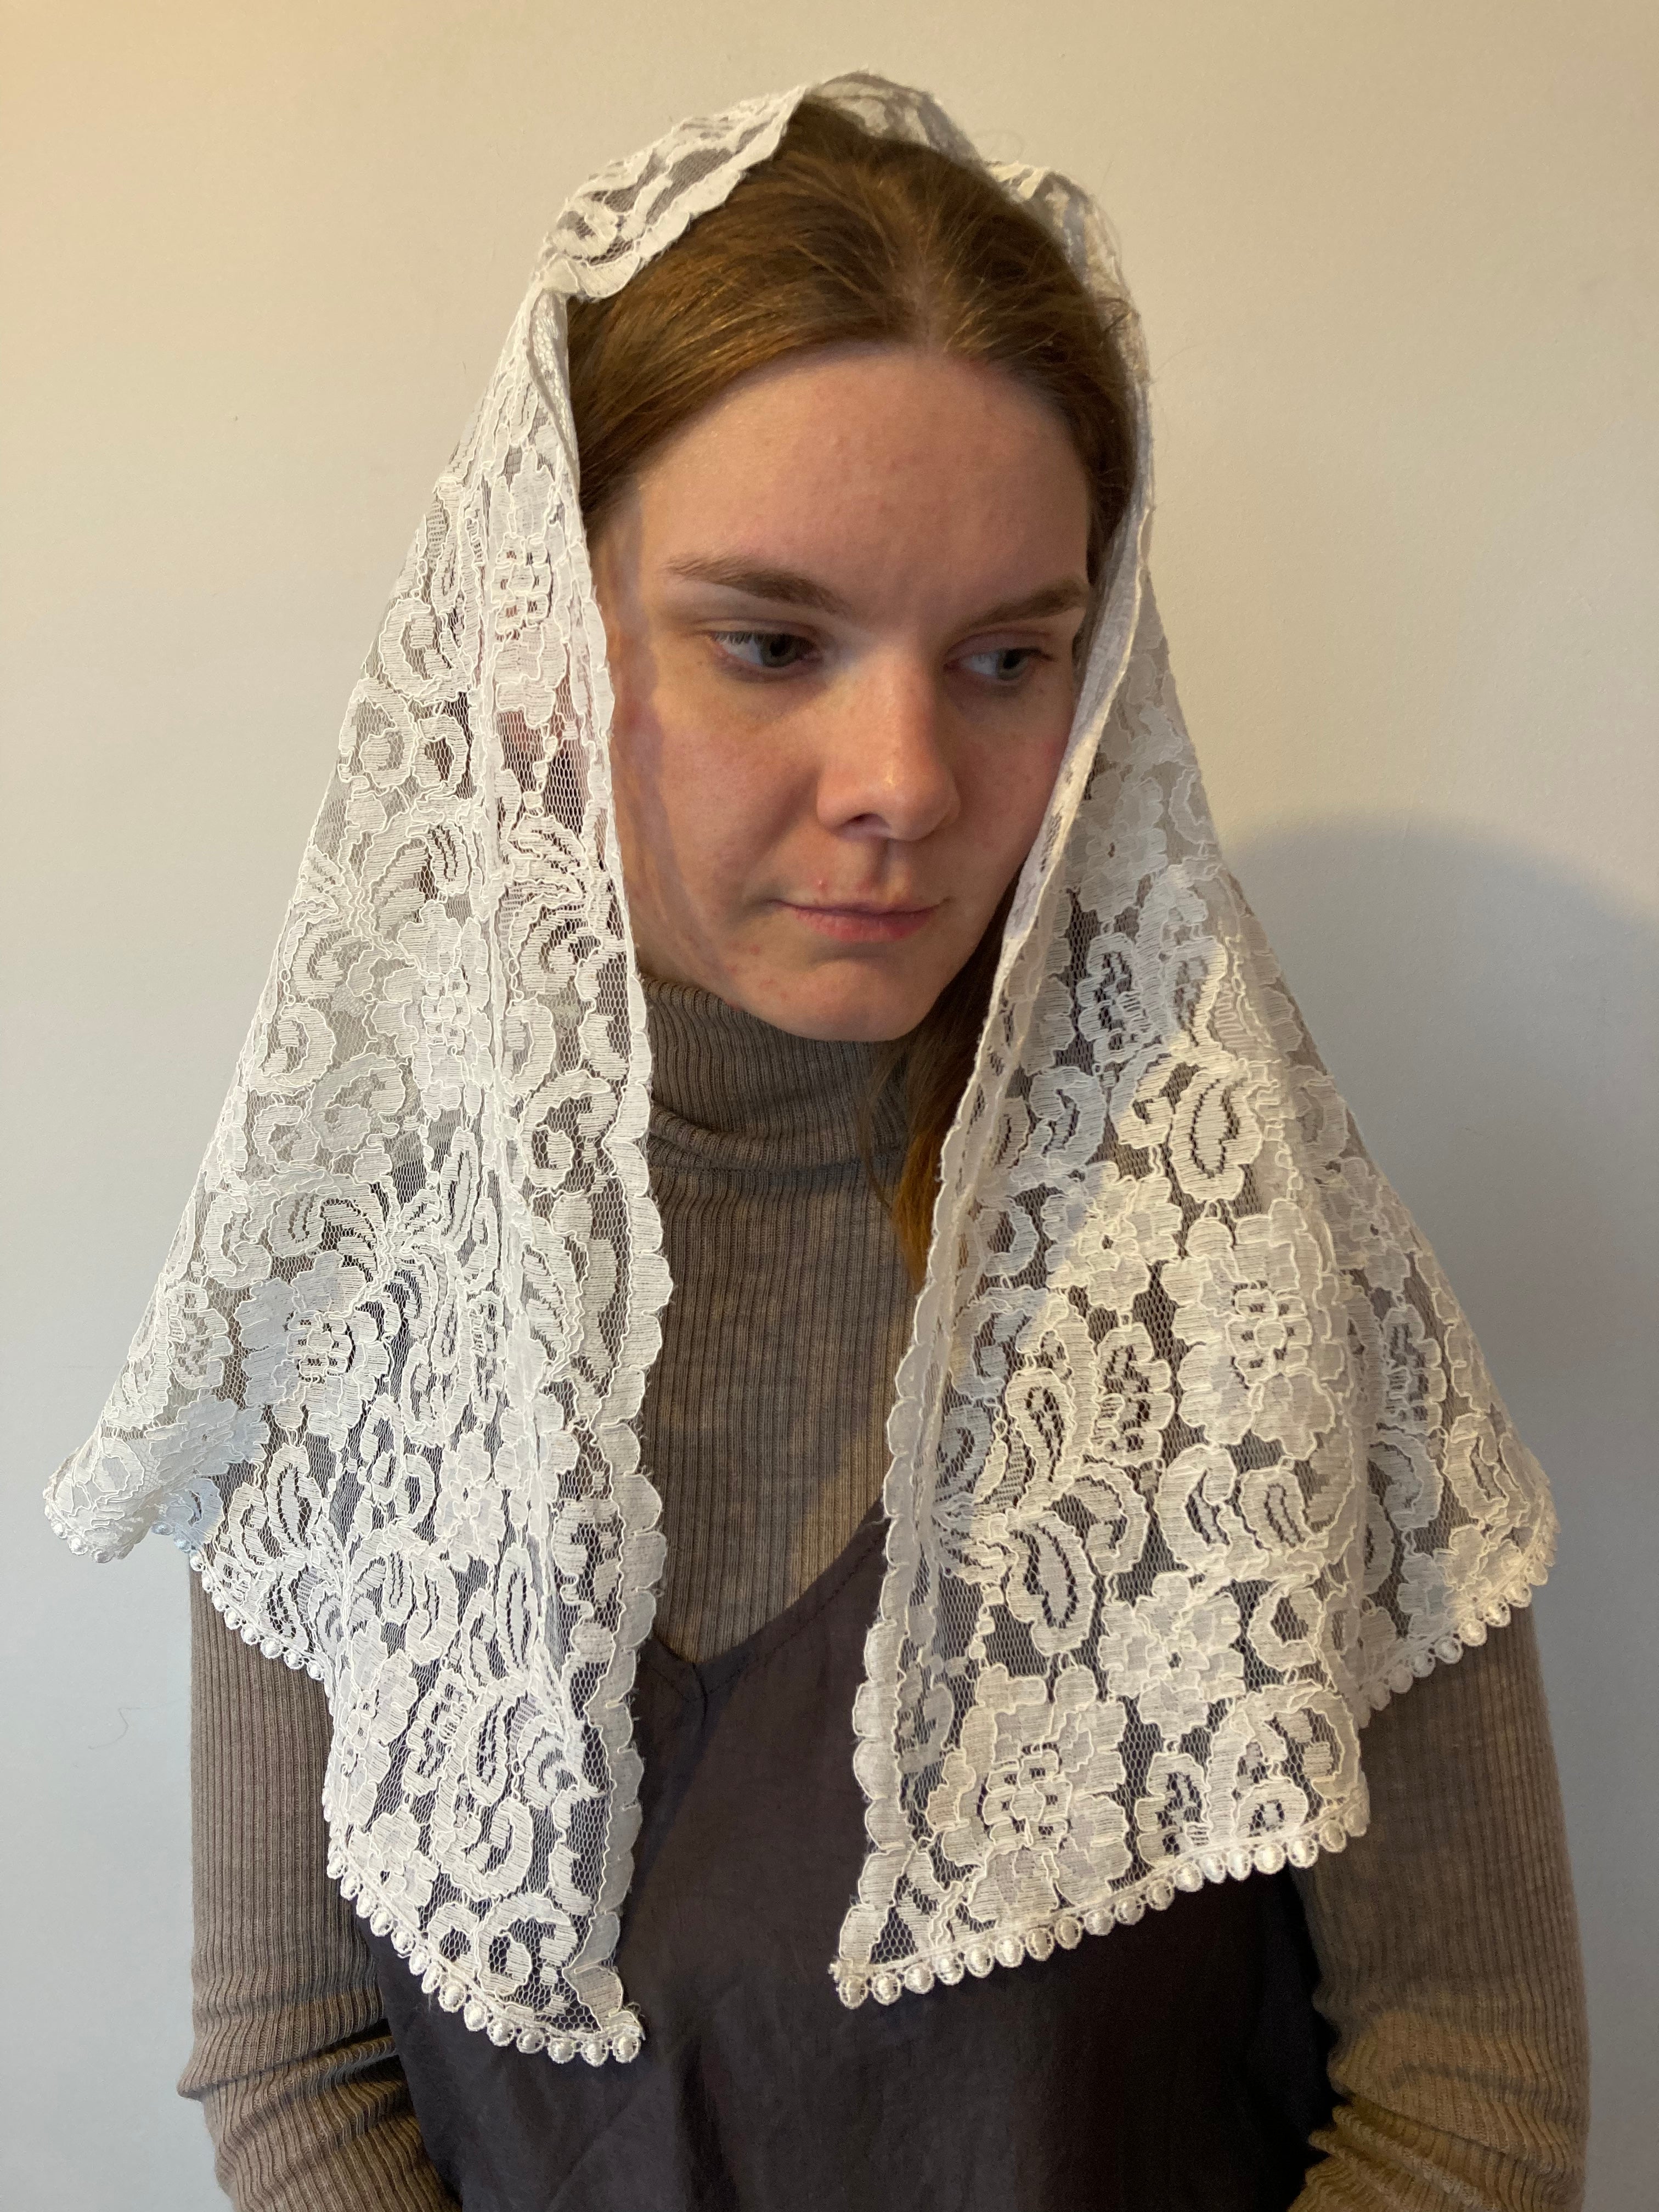 Our Lady of the Rosary veil